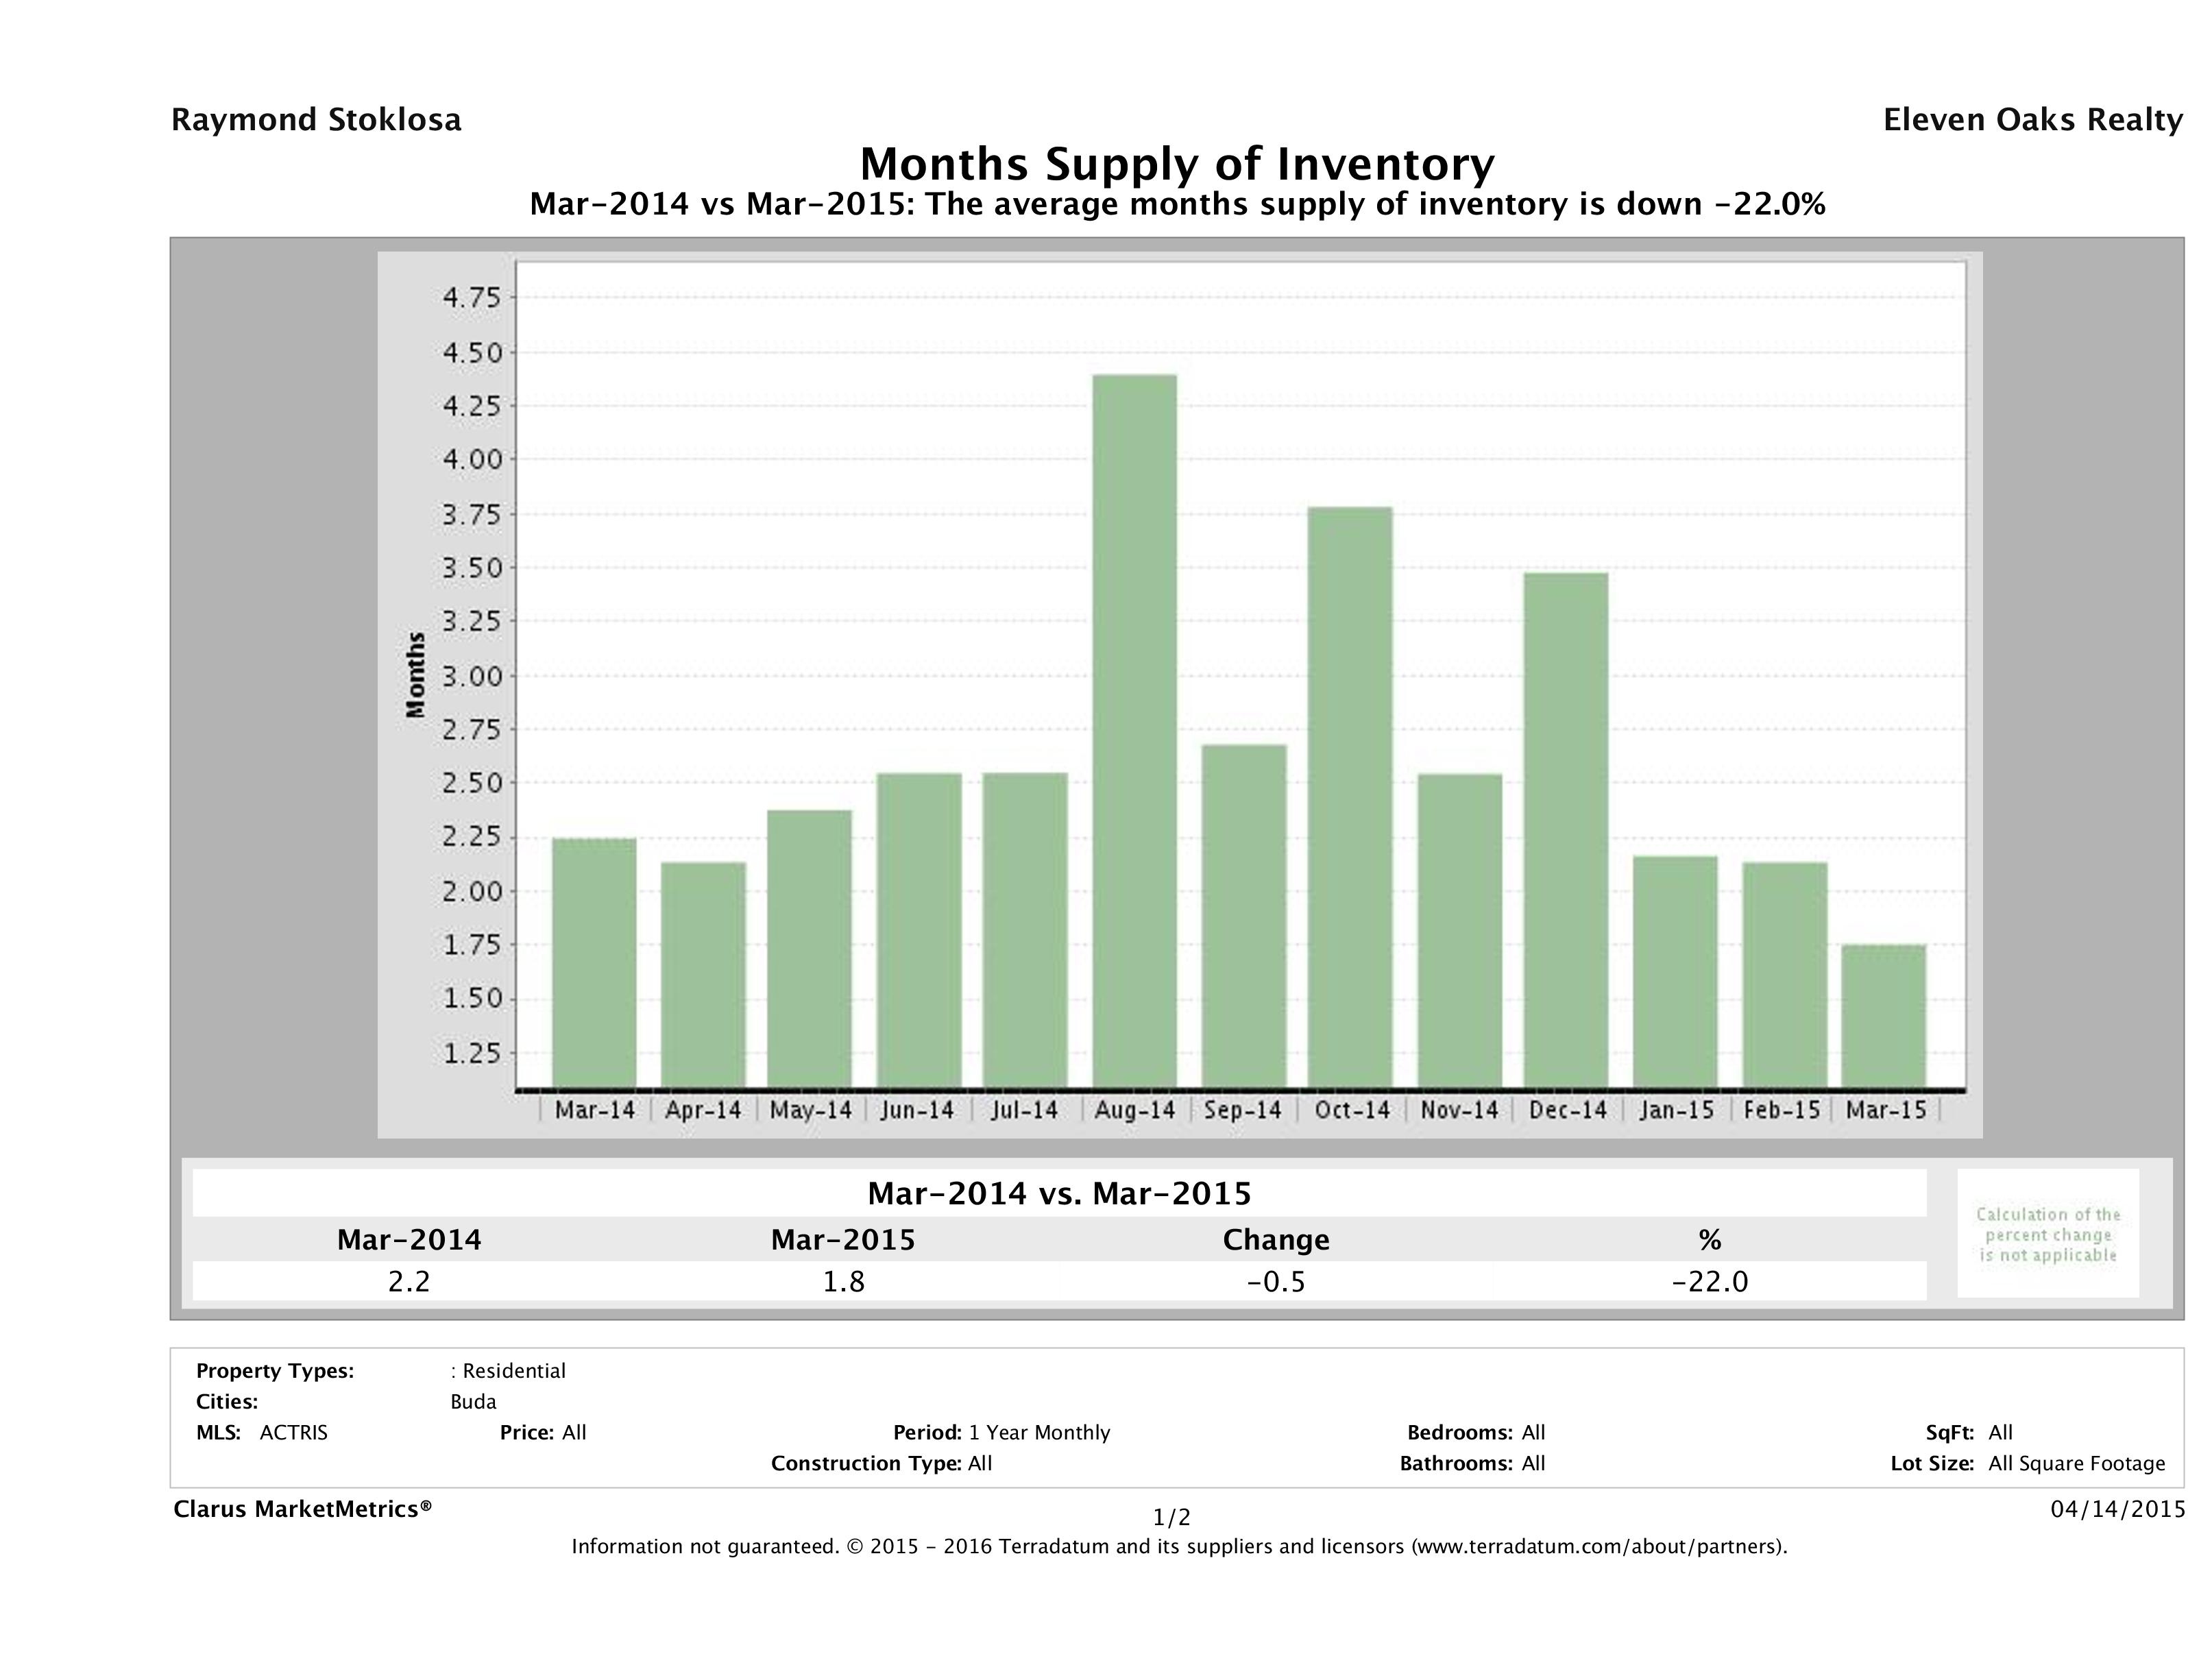 Buda single family home months inventory March 2015